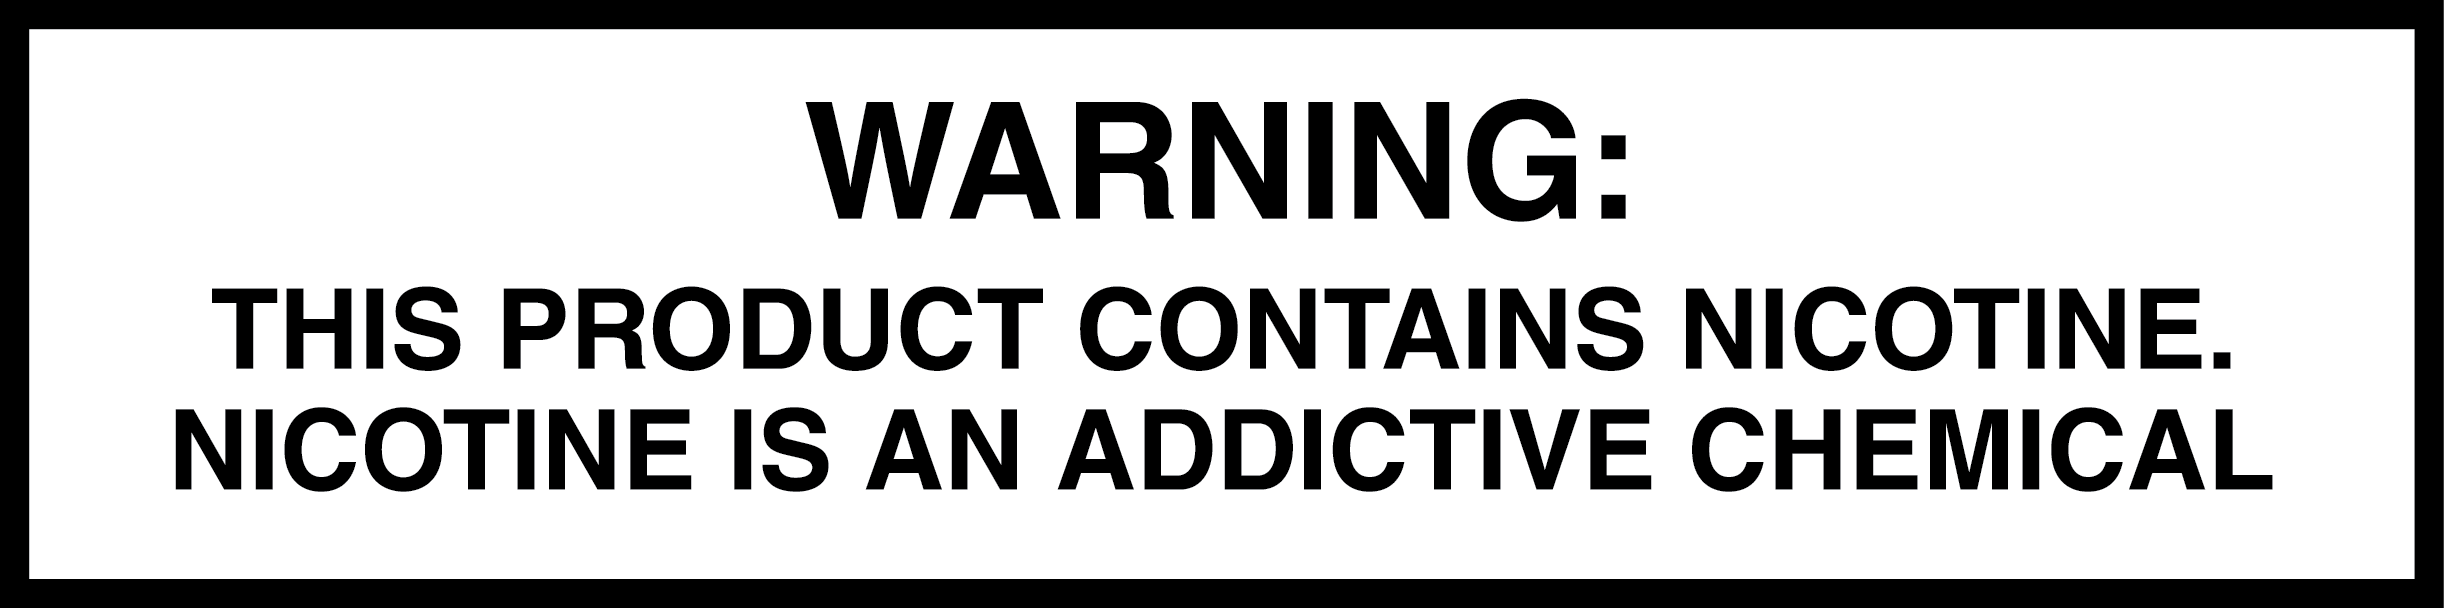 WARNING: This product contains nicotine. Nicotine is an addictive chemical.